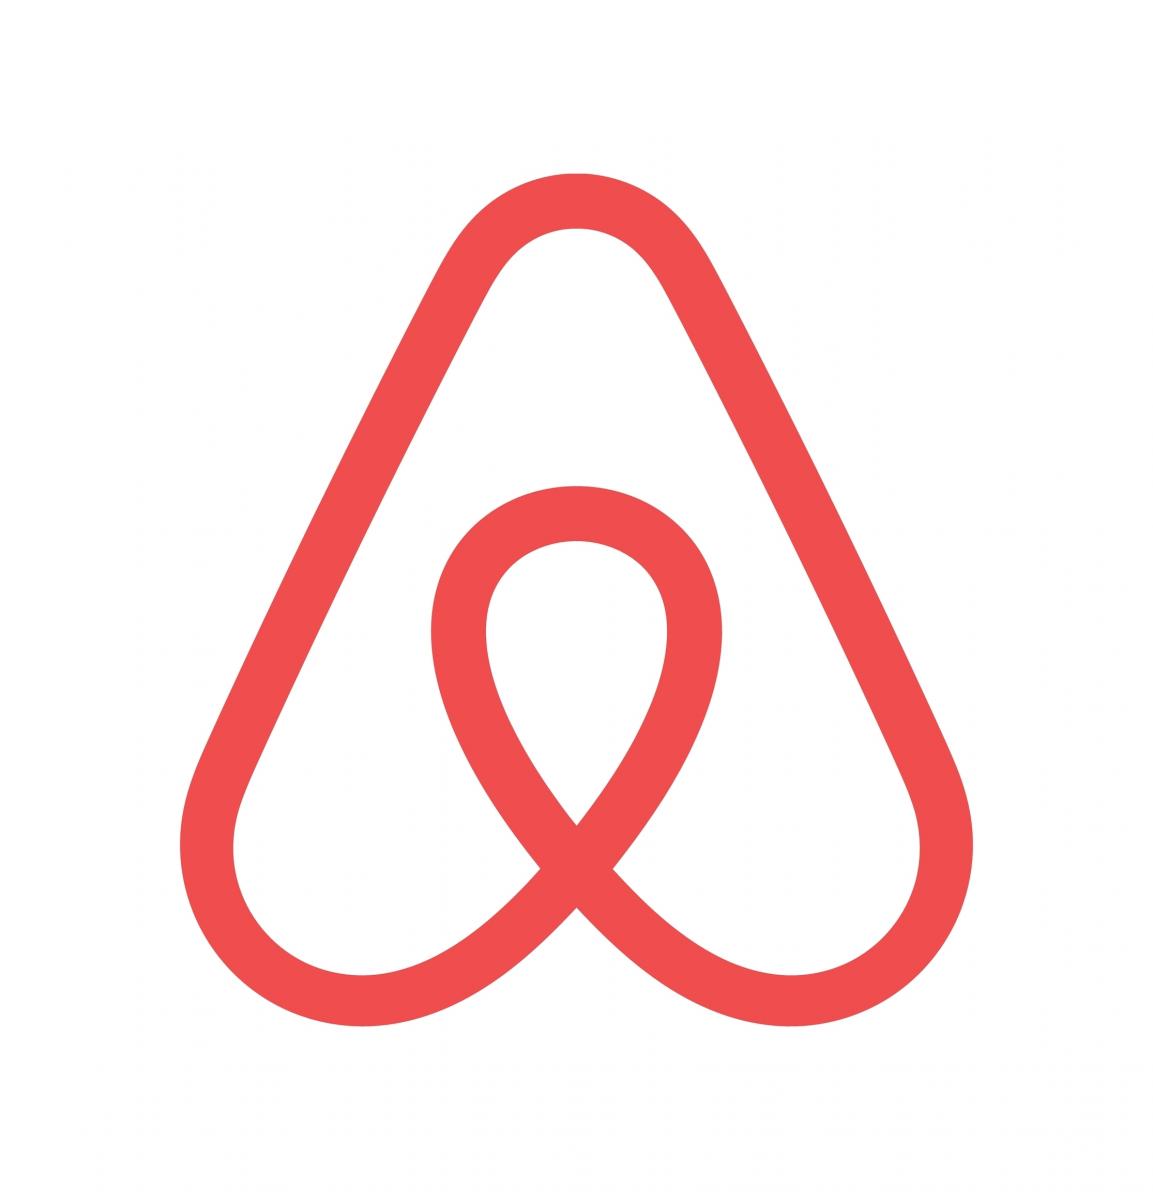 Estate agents back Airbnb clampdown “to be on same terms as rental sector”